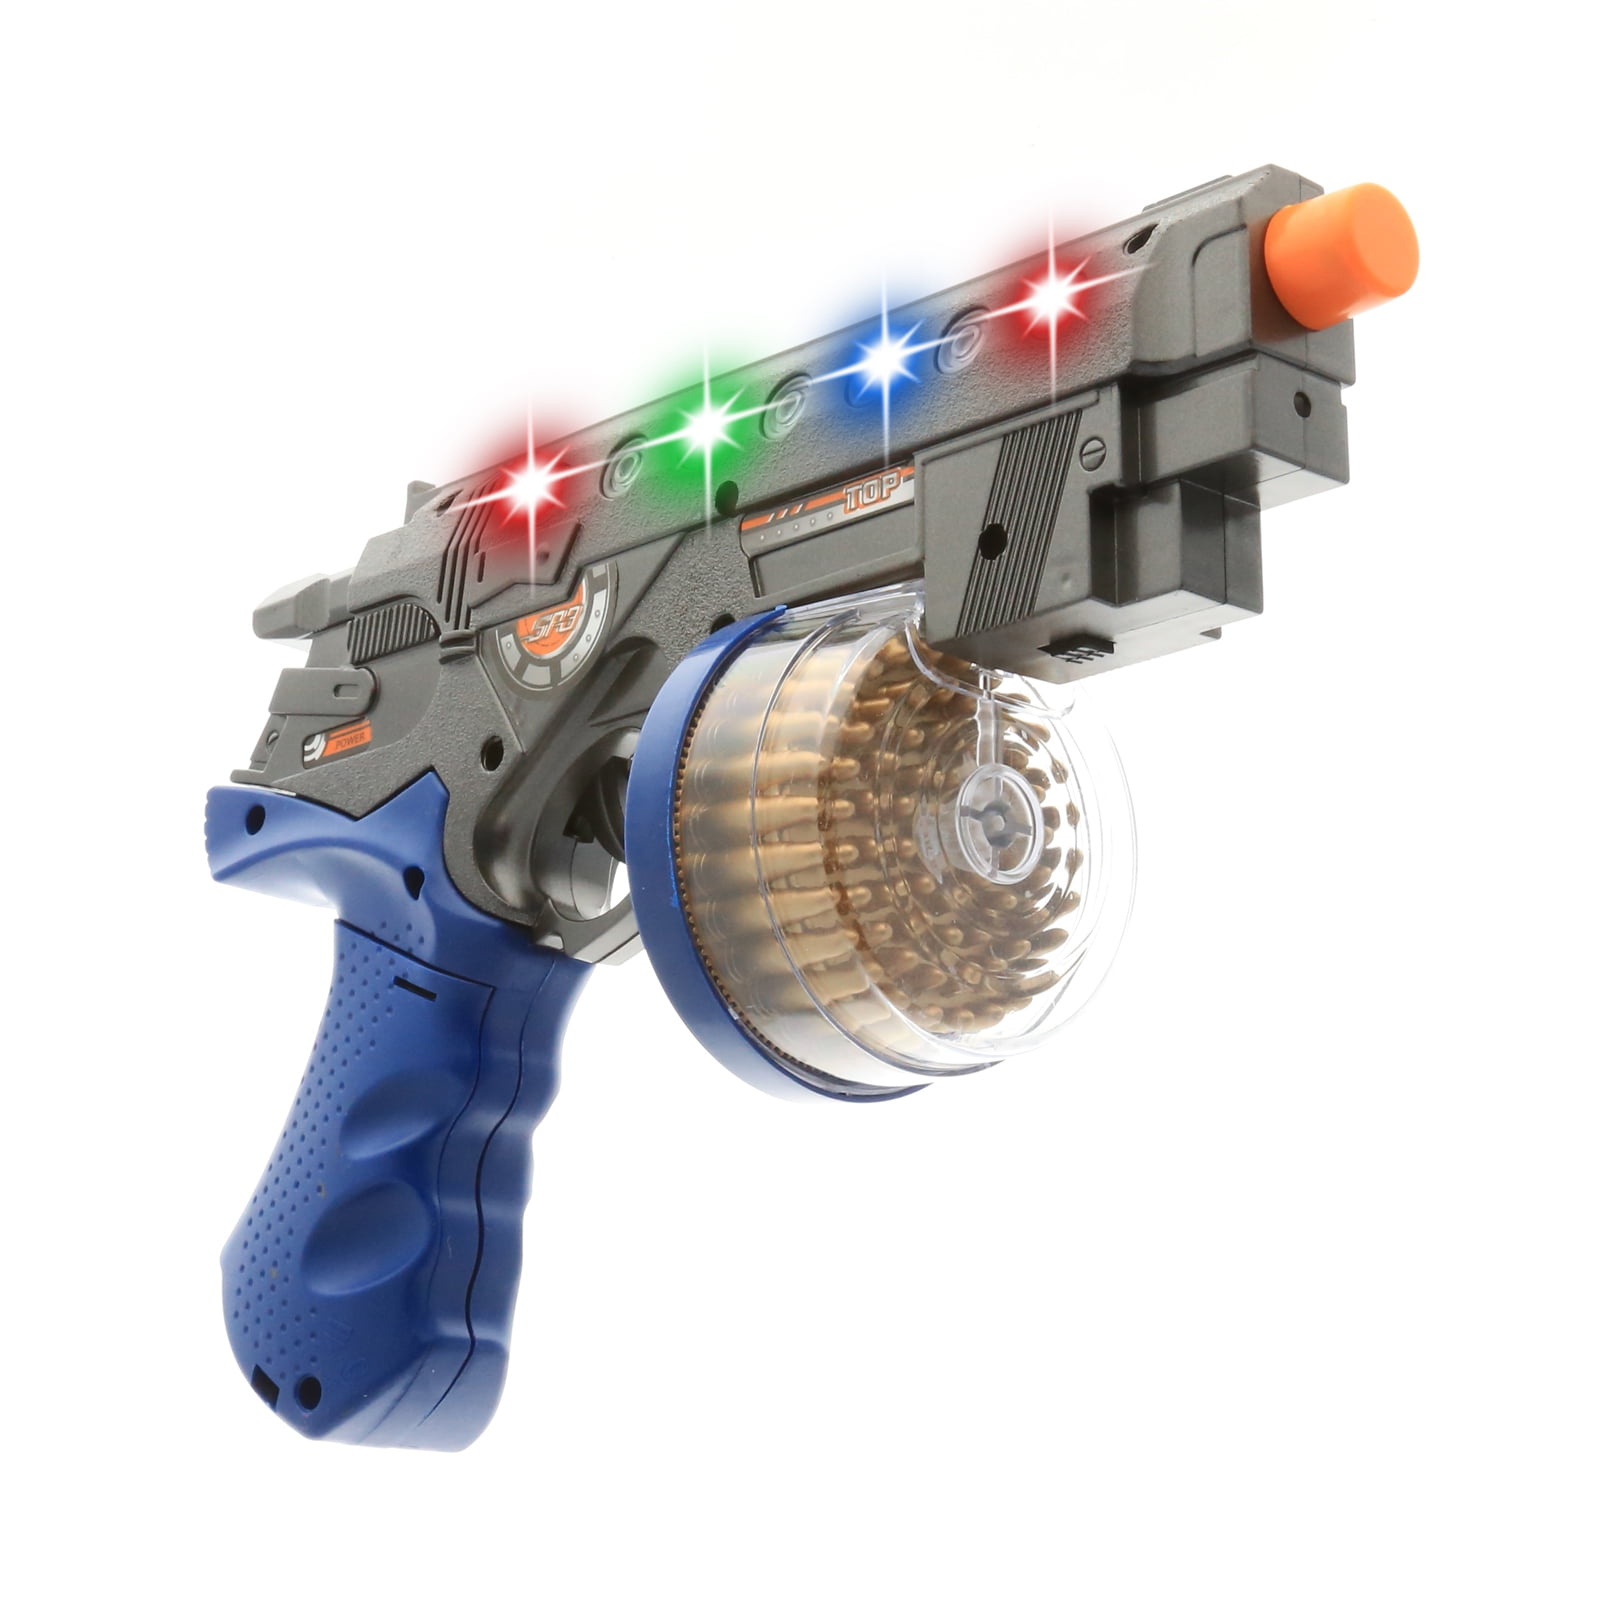 SPACE FLASH HOLOGRAM MILITARY ELECTRIC TOY GUN 